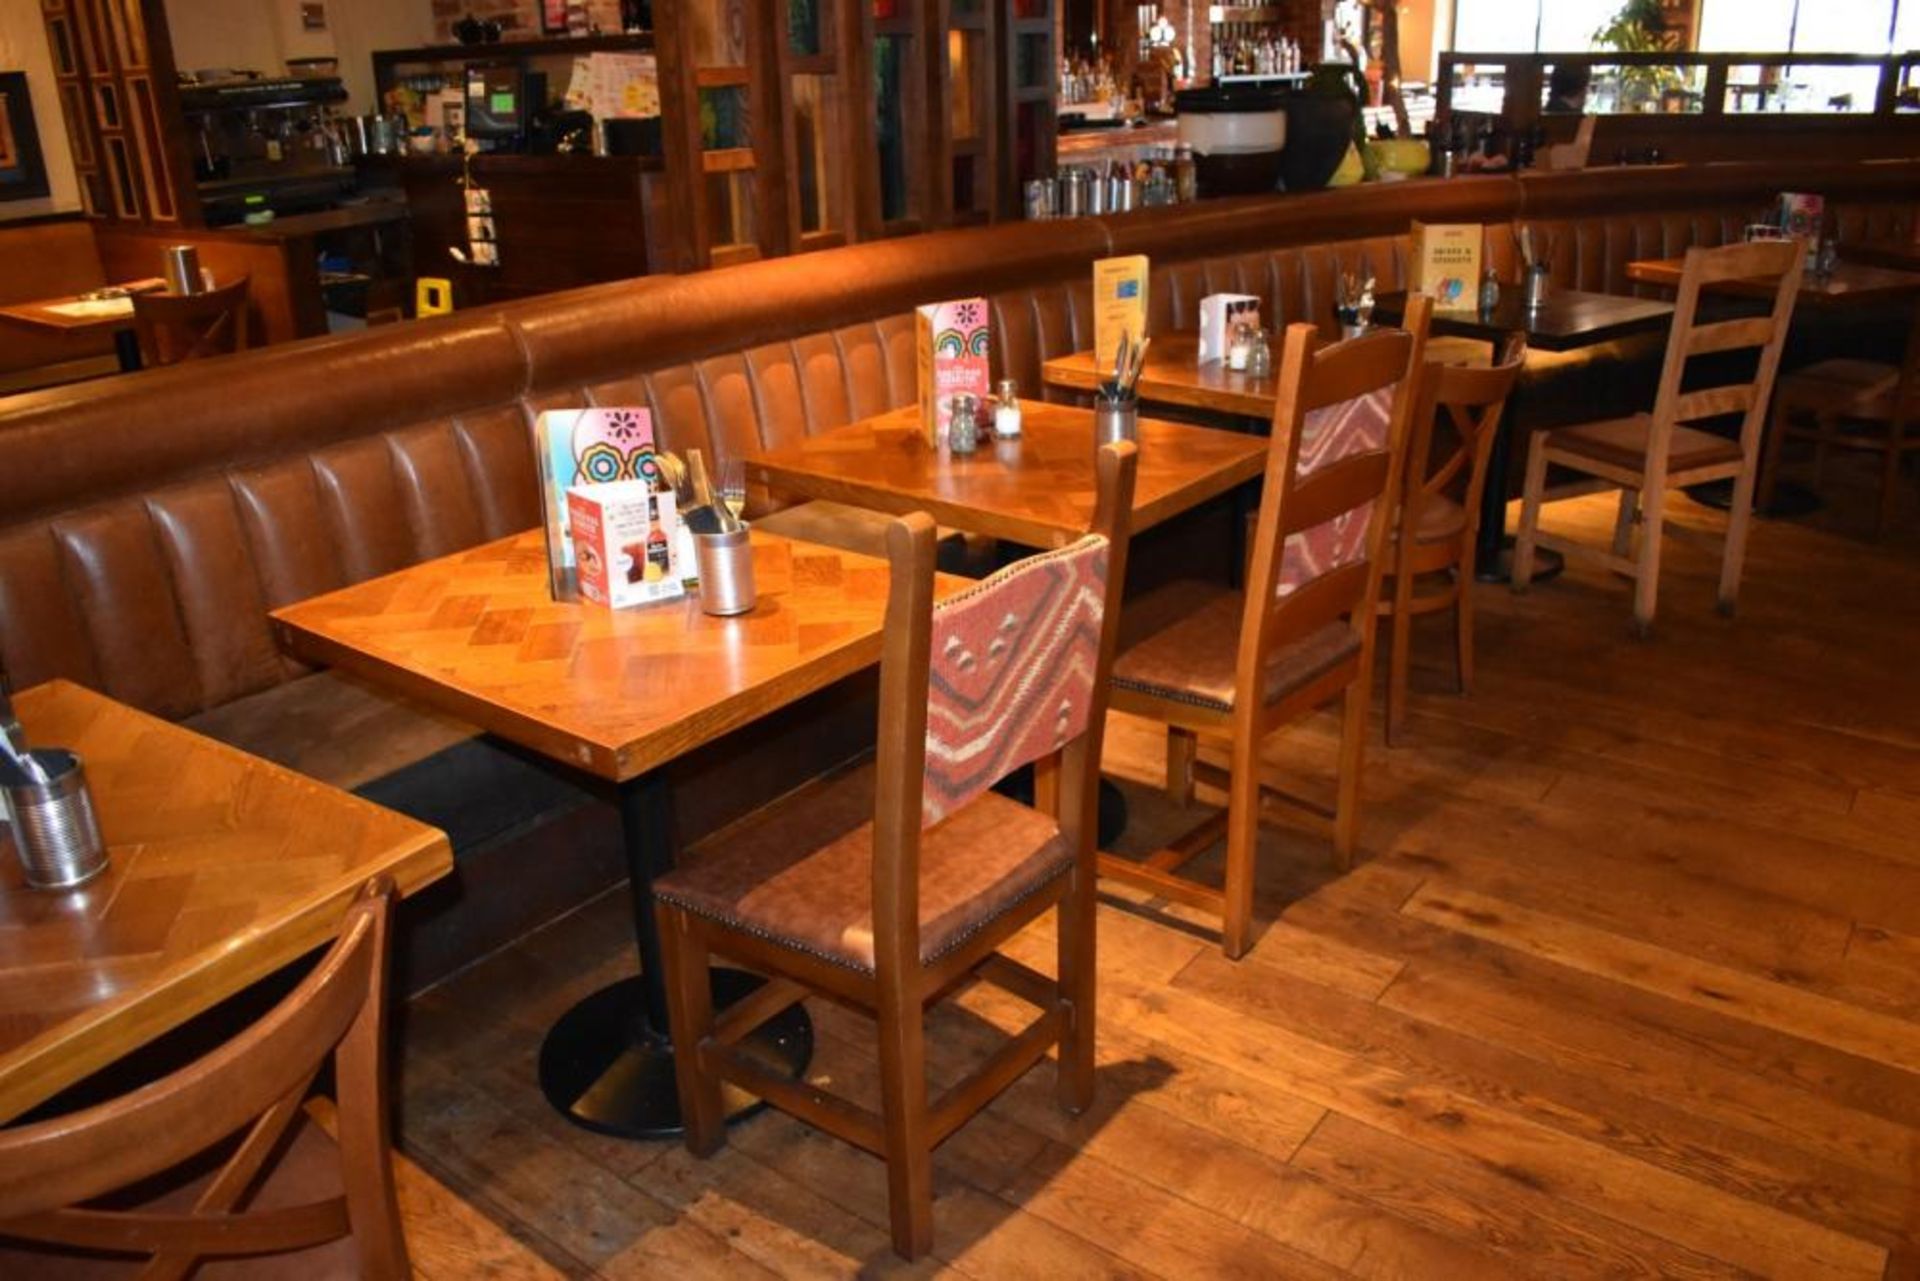 1 x Long Curved Seating Bench From Mexican Themed Restaurant - CL461 - Ref PR891 - Location: London - Image 3 of 14